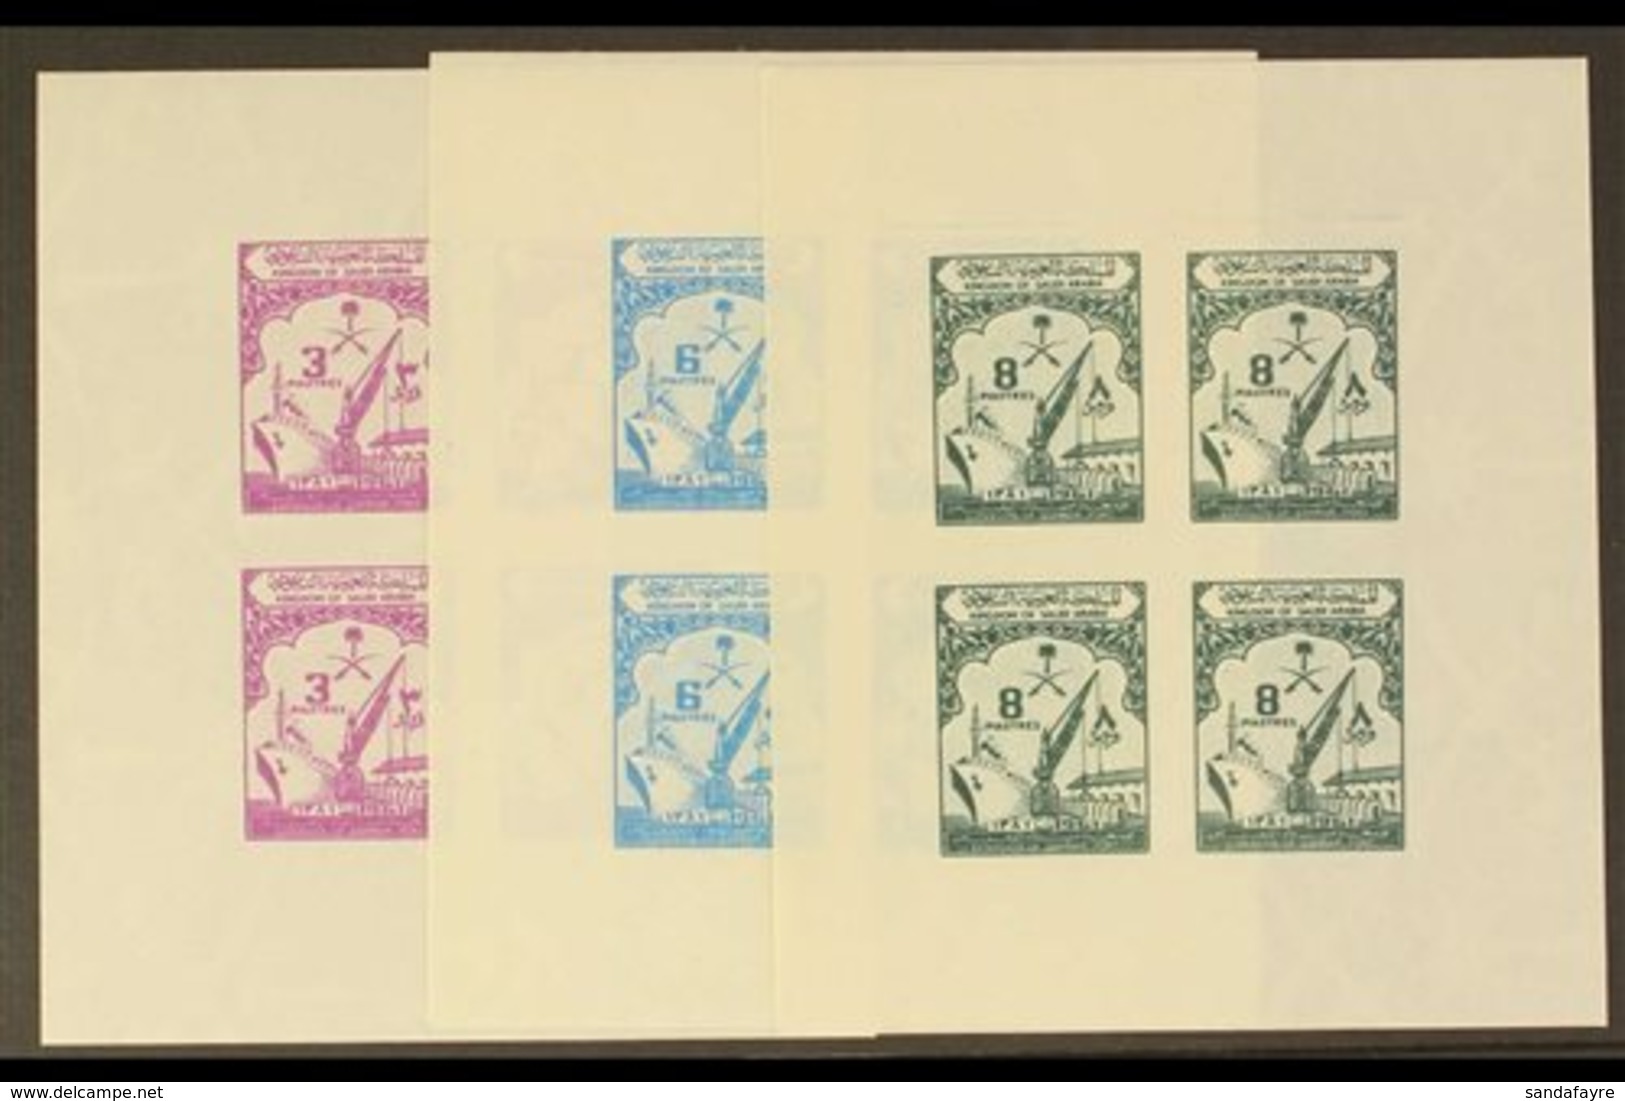 1961 1961 Opening Of Dammam Port Extension Set Of Three As IMPERFORATE MINIATURE SHEETS With Watermark Sideways And Each - Saoedi-Arabië